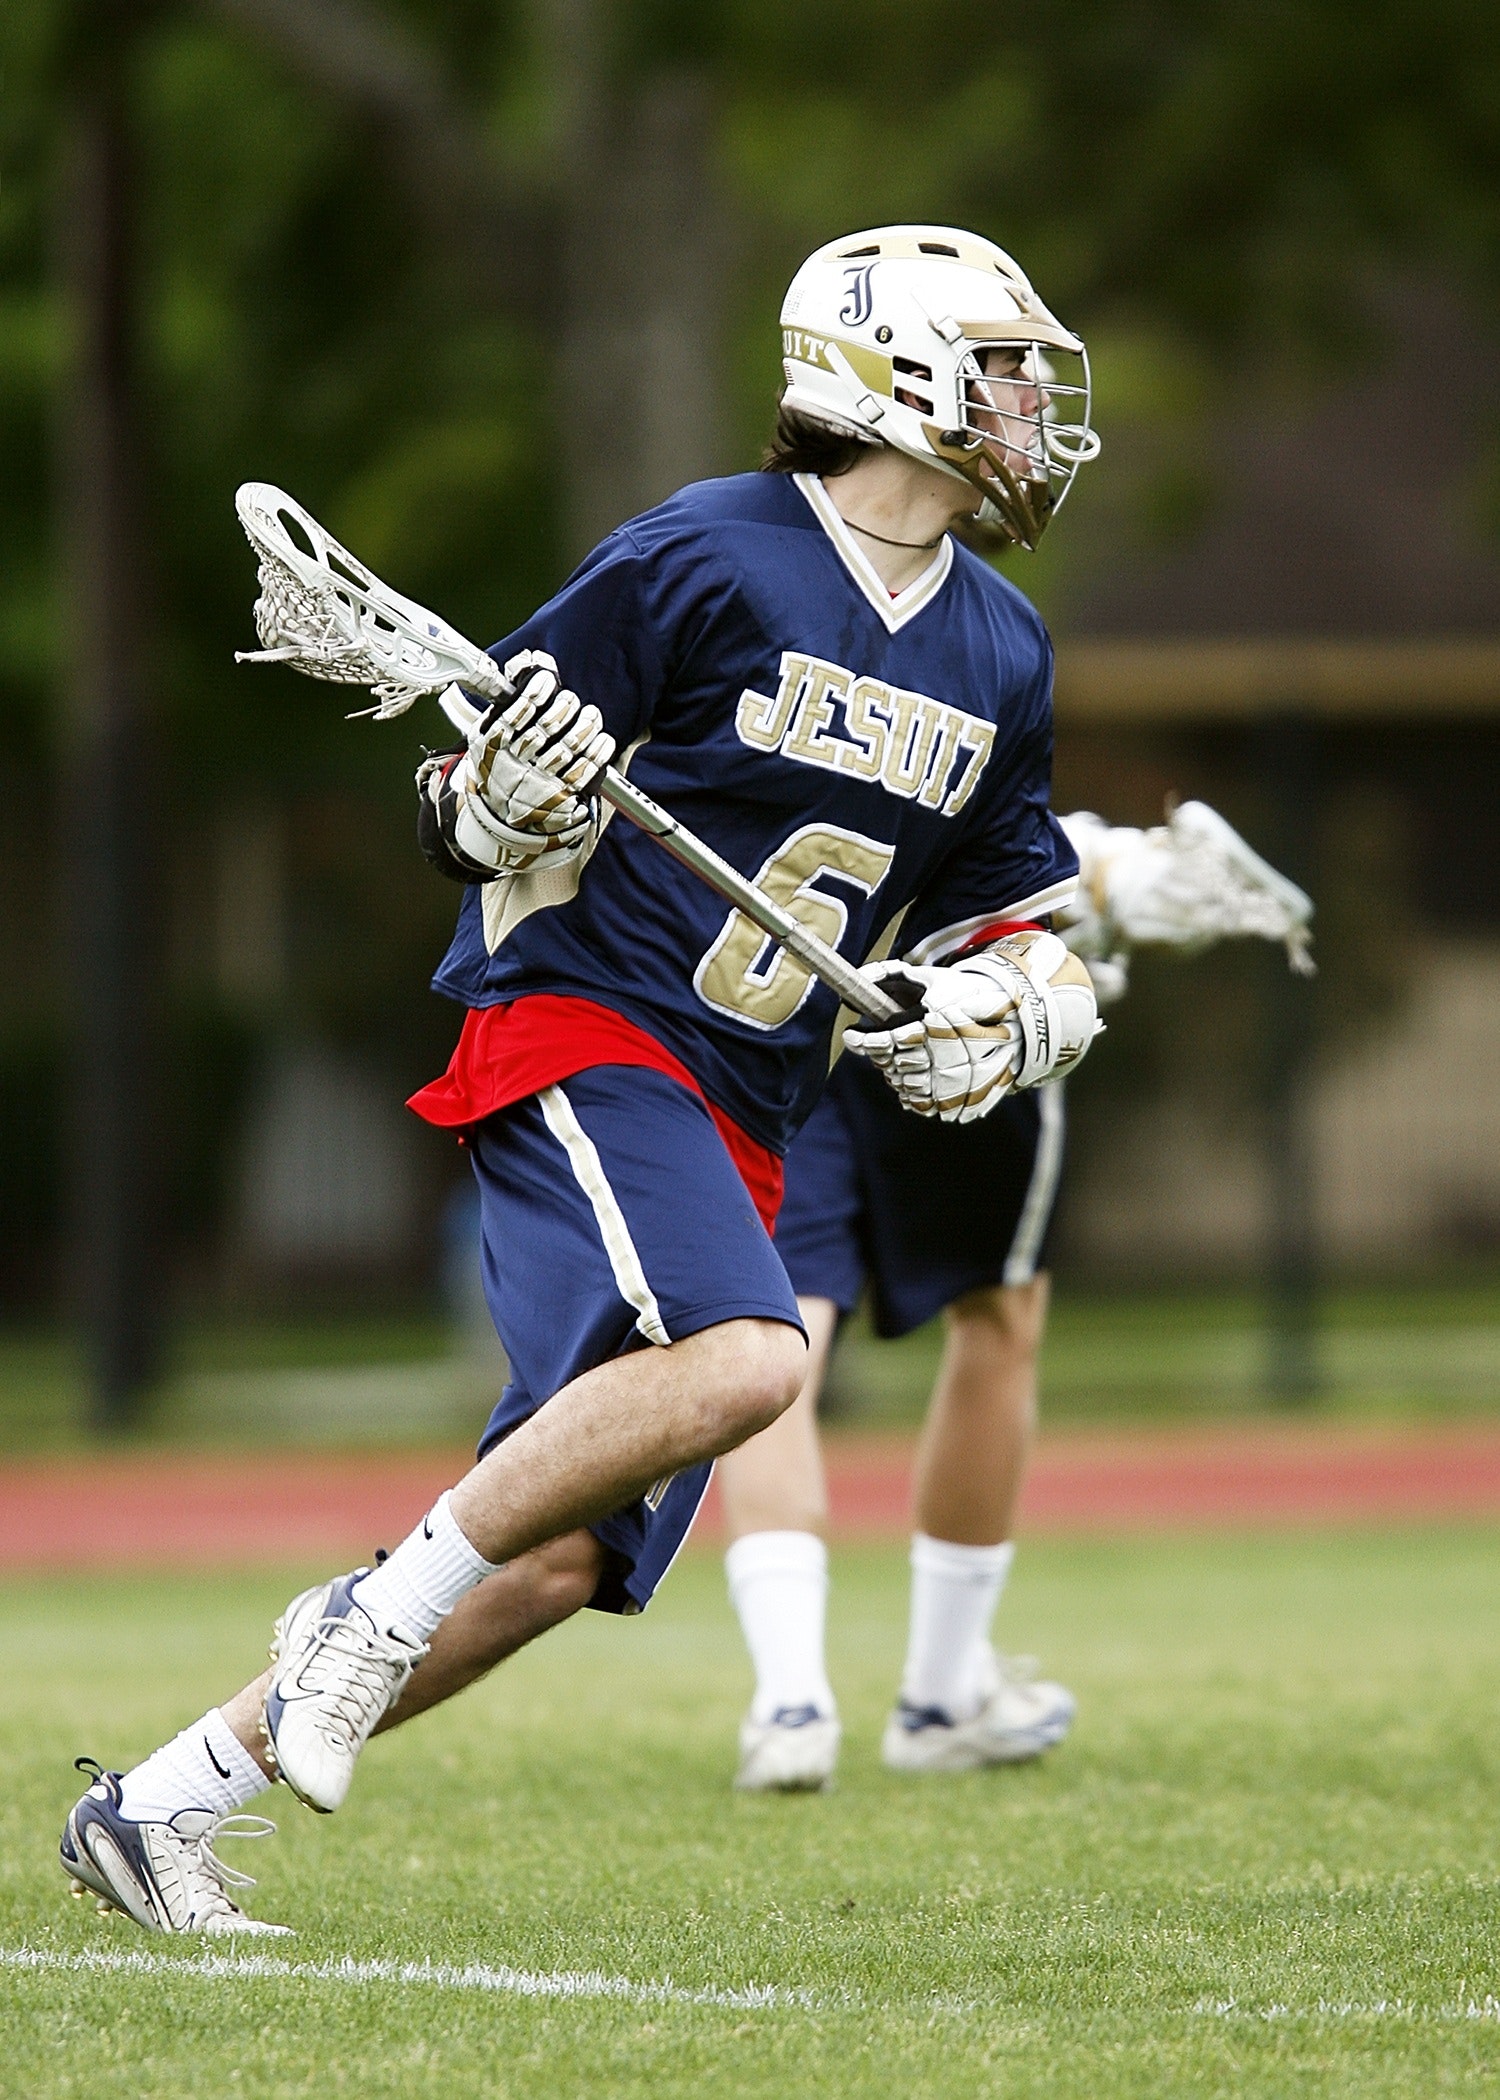 Man in blue and white jersey playing lacrosse photo